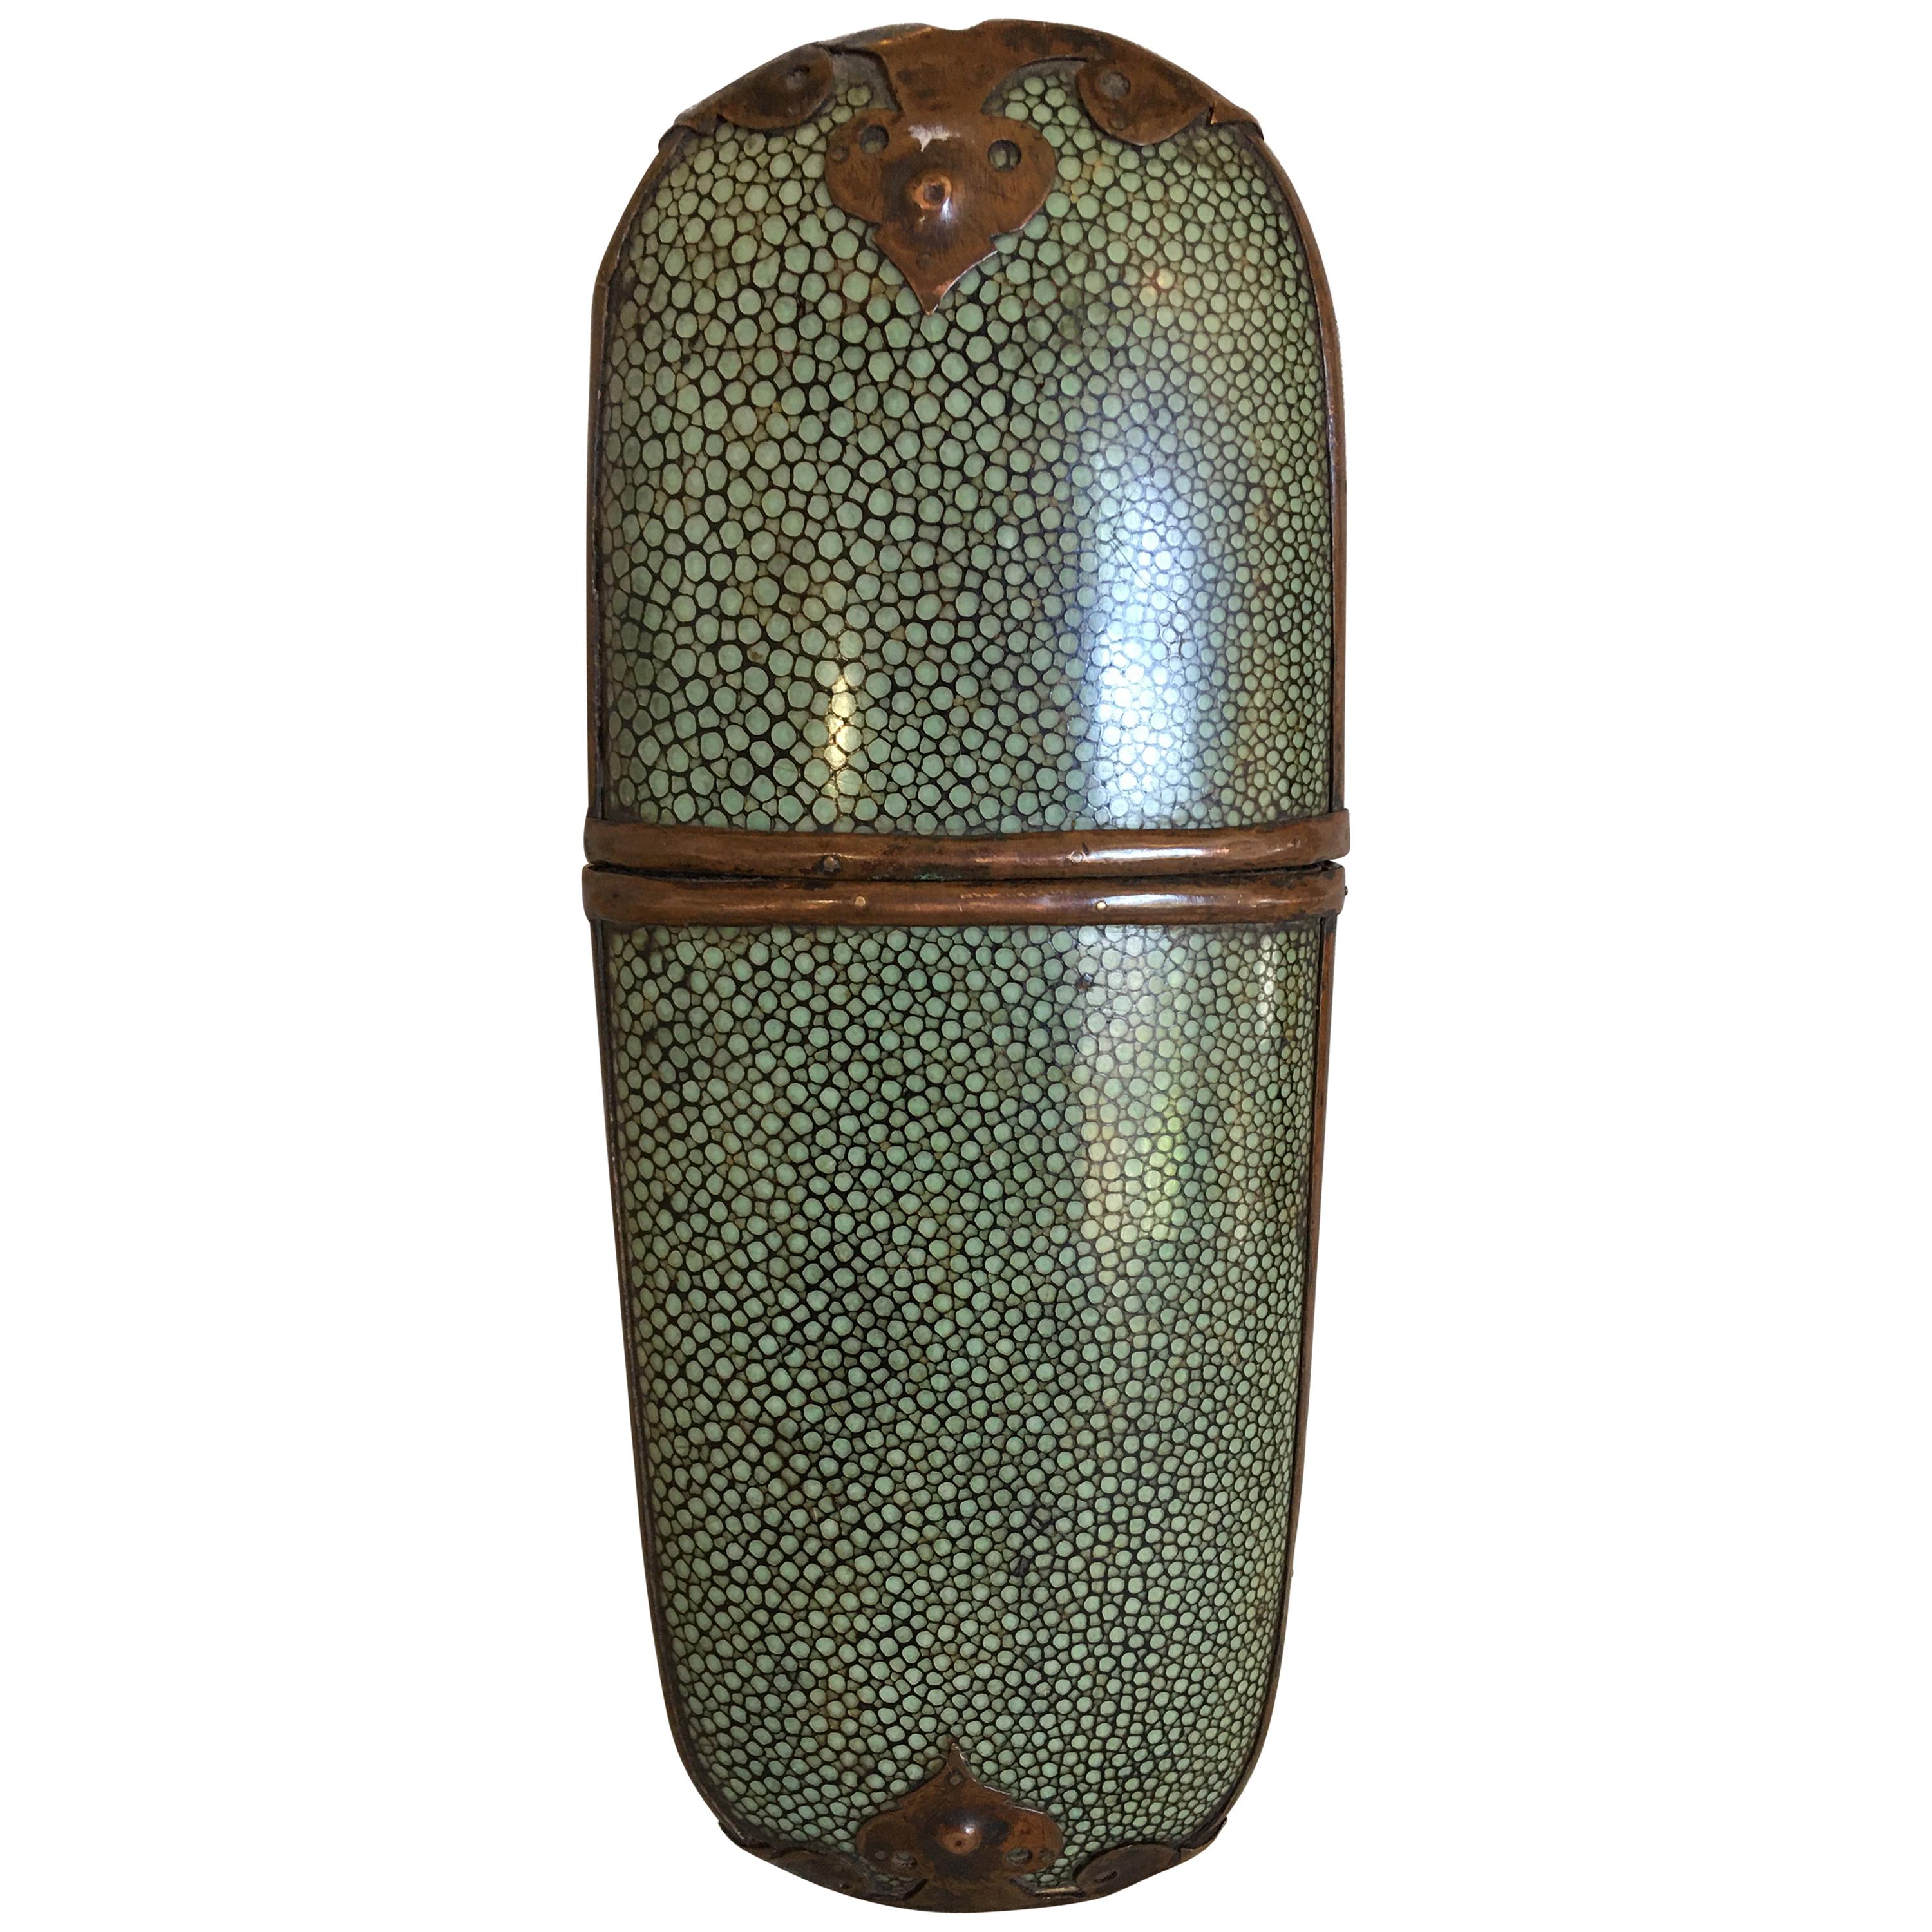 Chinese Green Shagreen Brass Mounted Eyeglass Case, Early 20th Century